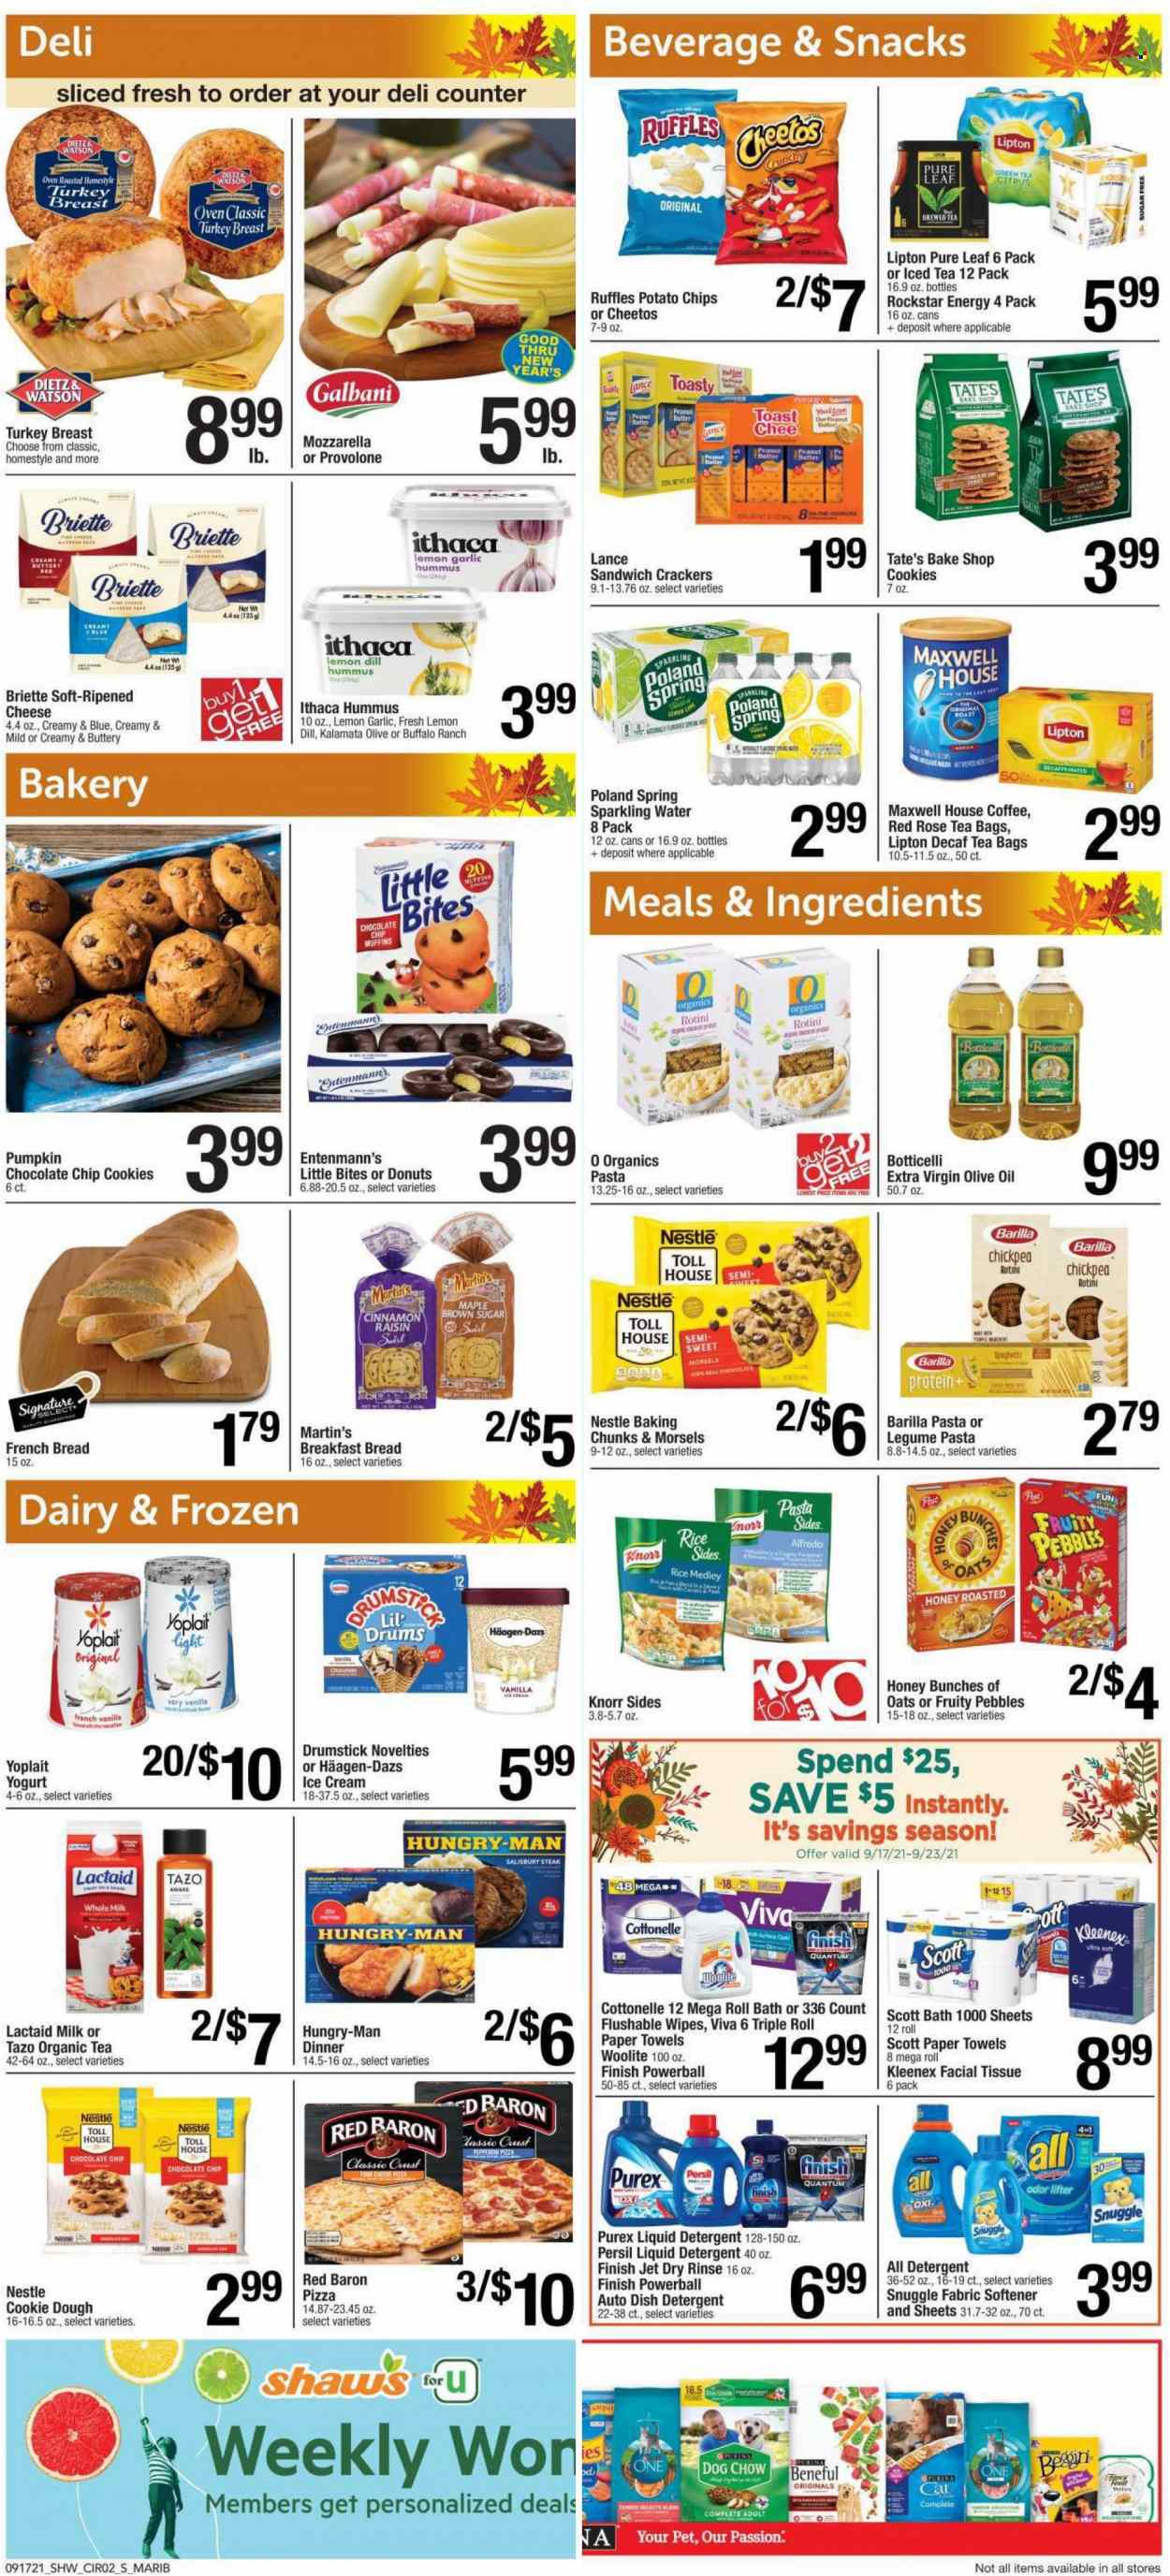 thumbnail - Shaw’s Flyer - 09/17/2021 - 09/23/2021 - Sales products - french bread, donut, muffin, Entenmann's, garlic, pizza, Knorr, Barilla, hummus, Lactaid, Galbani, Provolone, yoghurt, Yoplait, milk, Häagen-Dazs, Red Baron, cookie dough, cookies, Nestlé, snack, crackers, Little Bites, potato chips, Cheetos, Ruffles, cane sugar, Fruity Pebbles, rice, dill, extra virgin olive oil, olive oil, oil, peanut butter, Lipton, Rockstar, sparkling water, green tea, Maxwell House, tea bags, Pure Leaf, coffee, wine, rosé wine, steak, Cottonelle, Kleenex, Scott, wipes, tissues, kitchen towels, paper towels, detergent, Woolite, Snuggle, Persil, fabric softener, liquid detergent, Purex, Finish Powerball, Jet, Dog Chow, rose. Page 2.